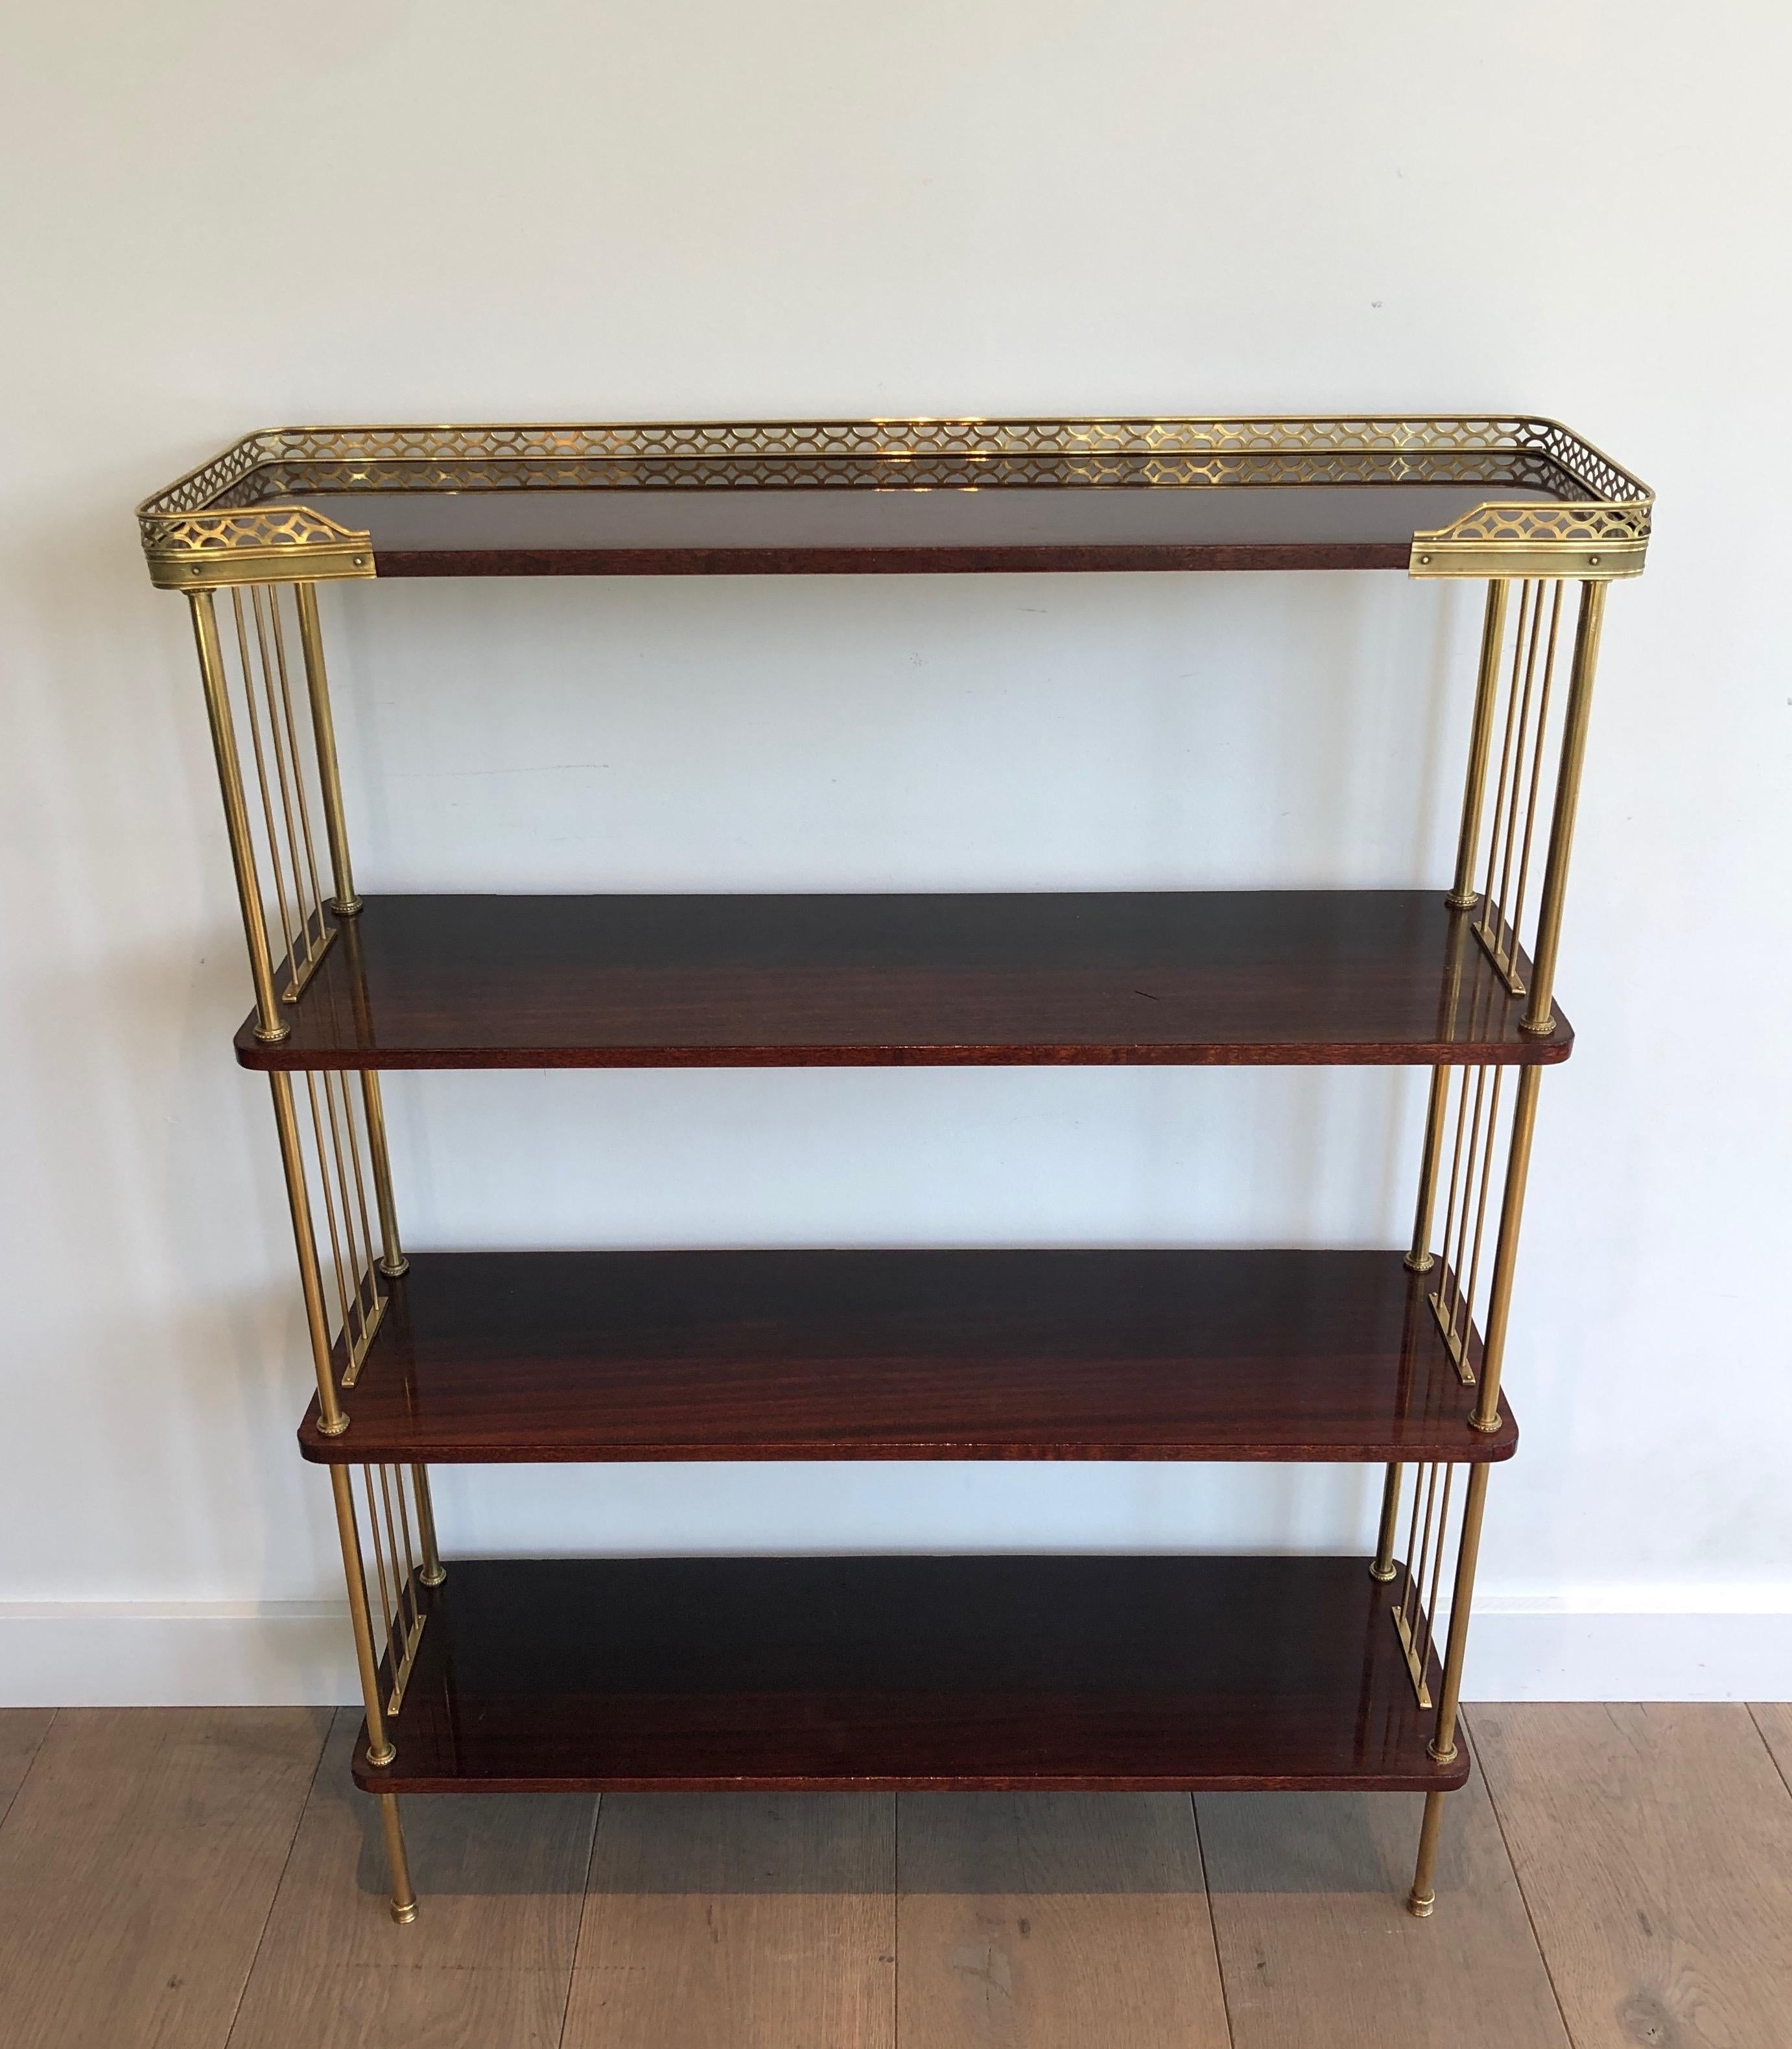 Neoclassical Wood and Brass Shelves Unit Attributed to Maison Jansen